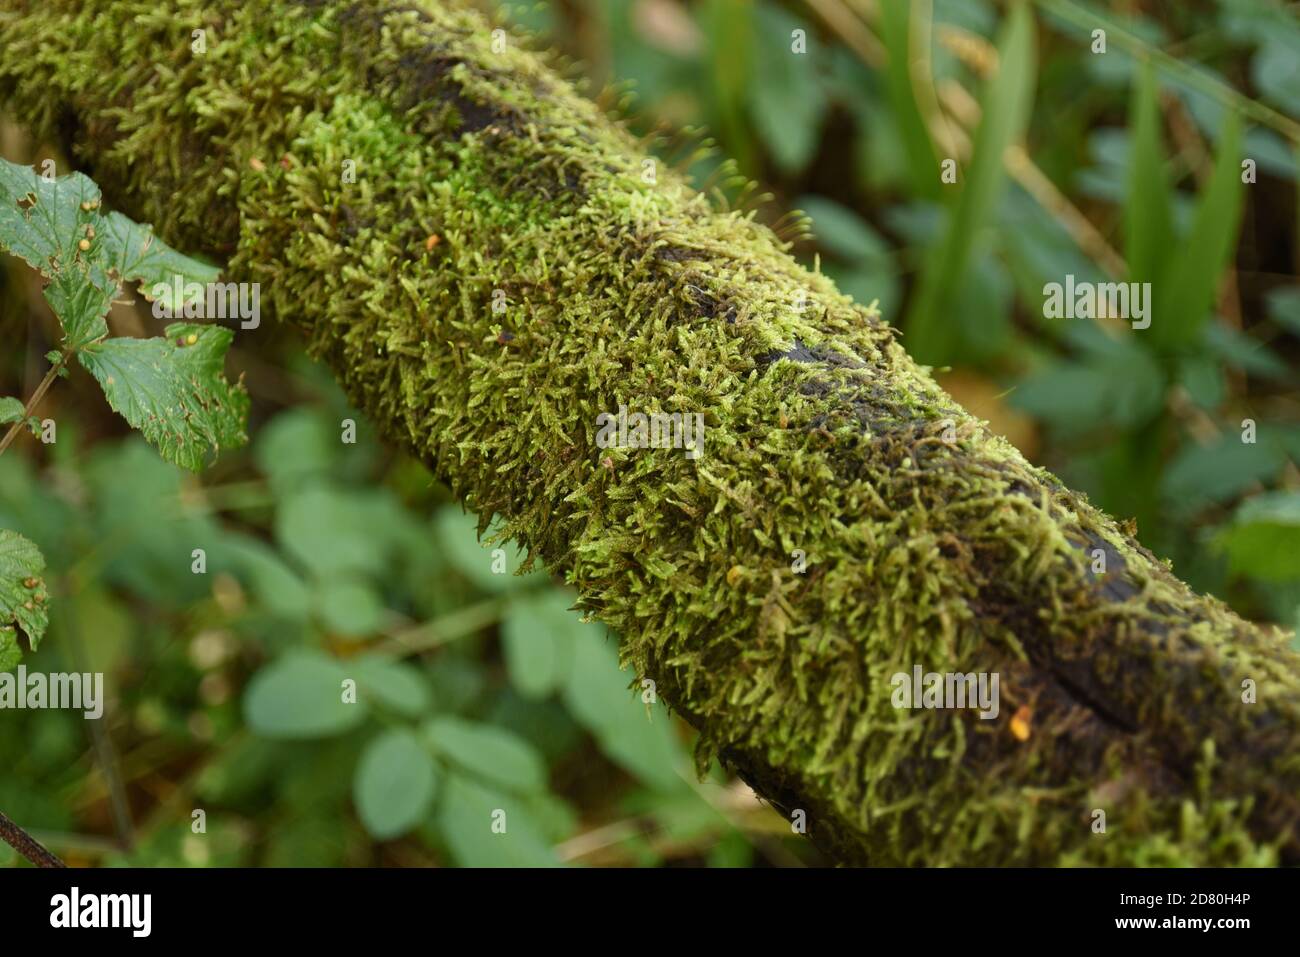 Green moss on a wooden rail Stock Photo